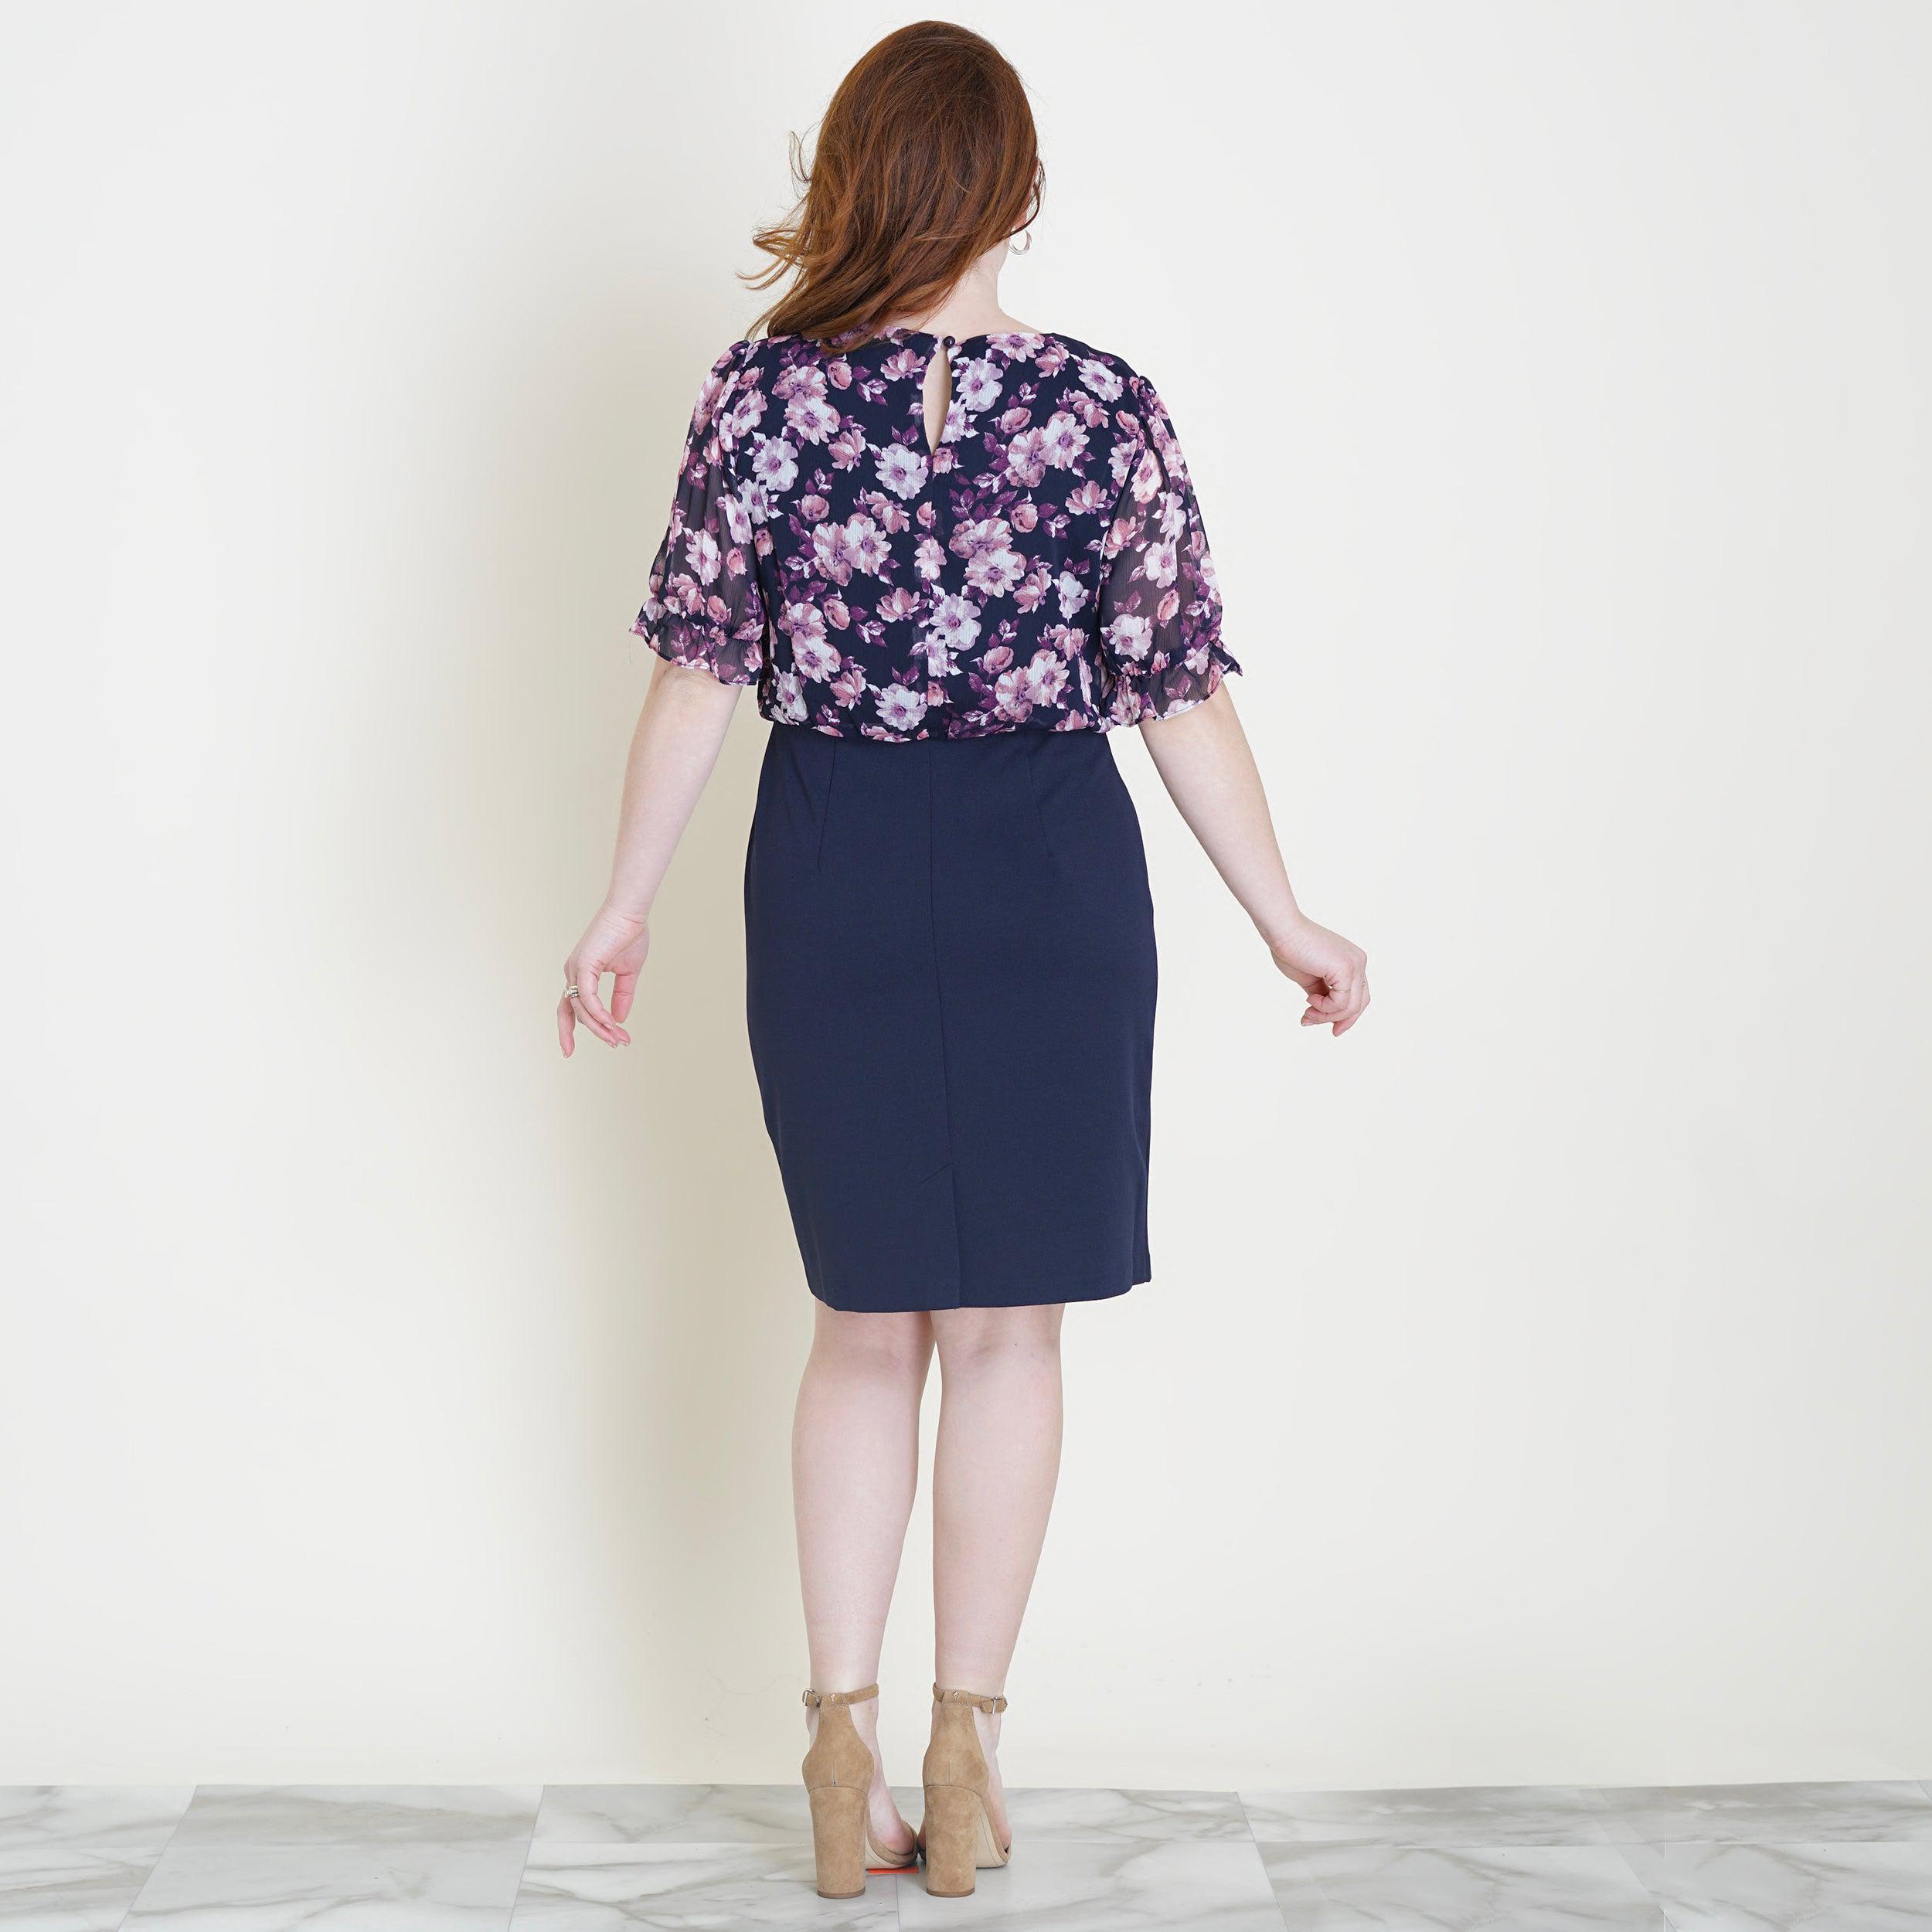 Woman posing wearing Navy/Mauve Caroline Navy and Mauve Floral Dress from Connected Apparel